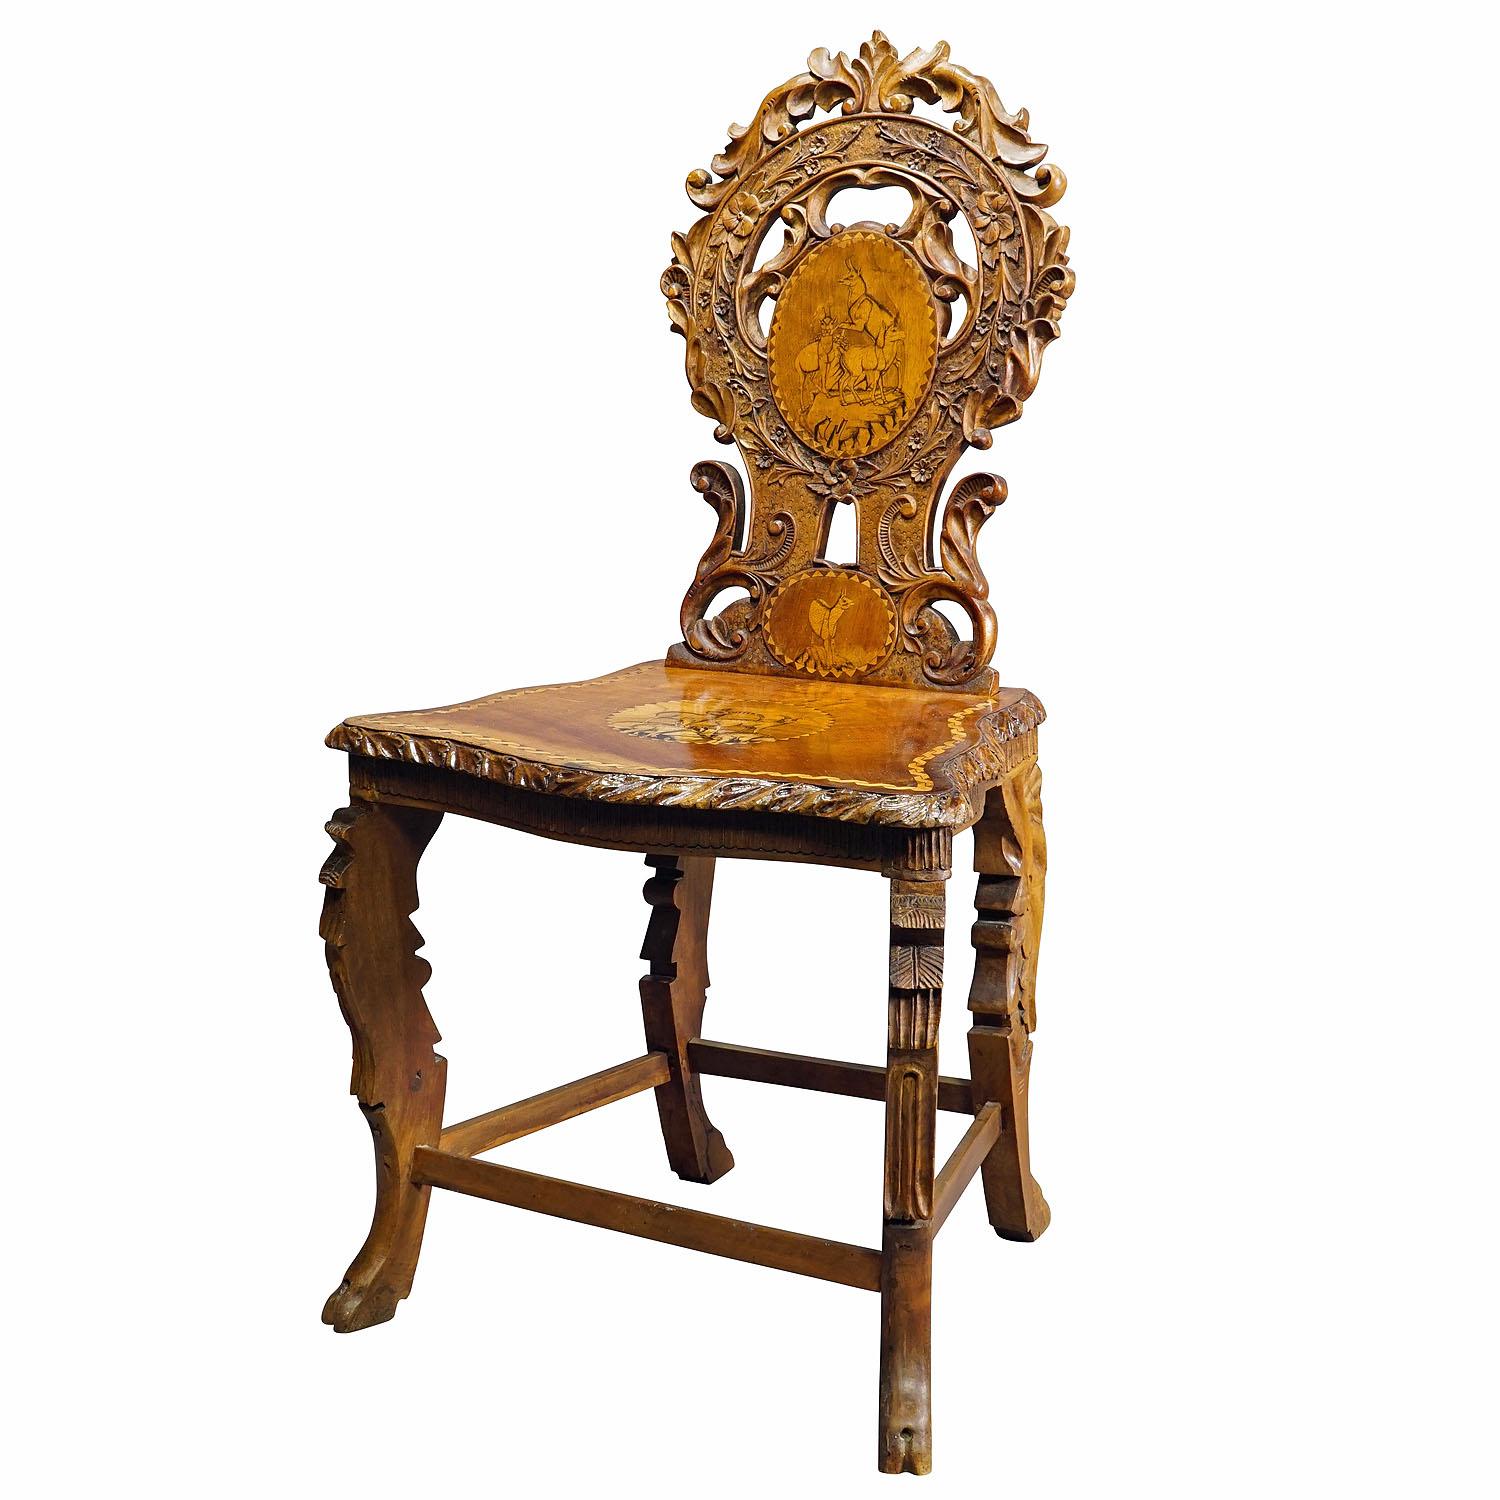 Rare Nutwood Edelweis Marquetry Chair Swiss Brienz 1900

A very nice antique Swiss nutwood chair decorated with inlayed and painted sceneries depicting ibex and chamois. The backrest is additionaly decorated with elaborate edelweis flower carvings.